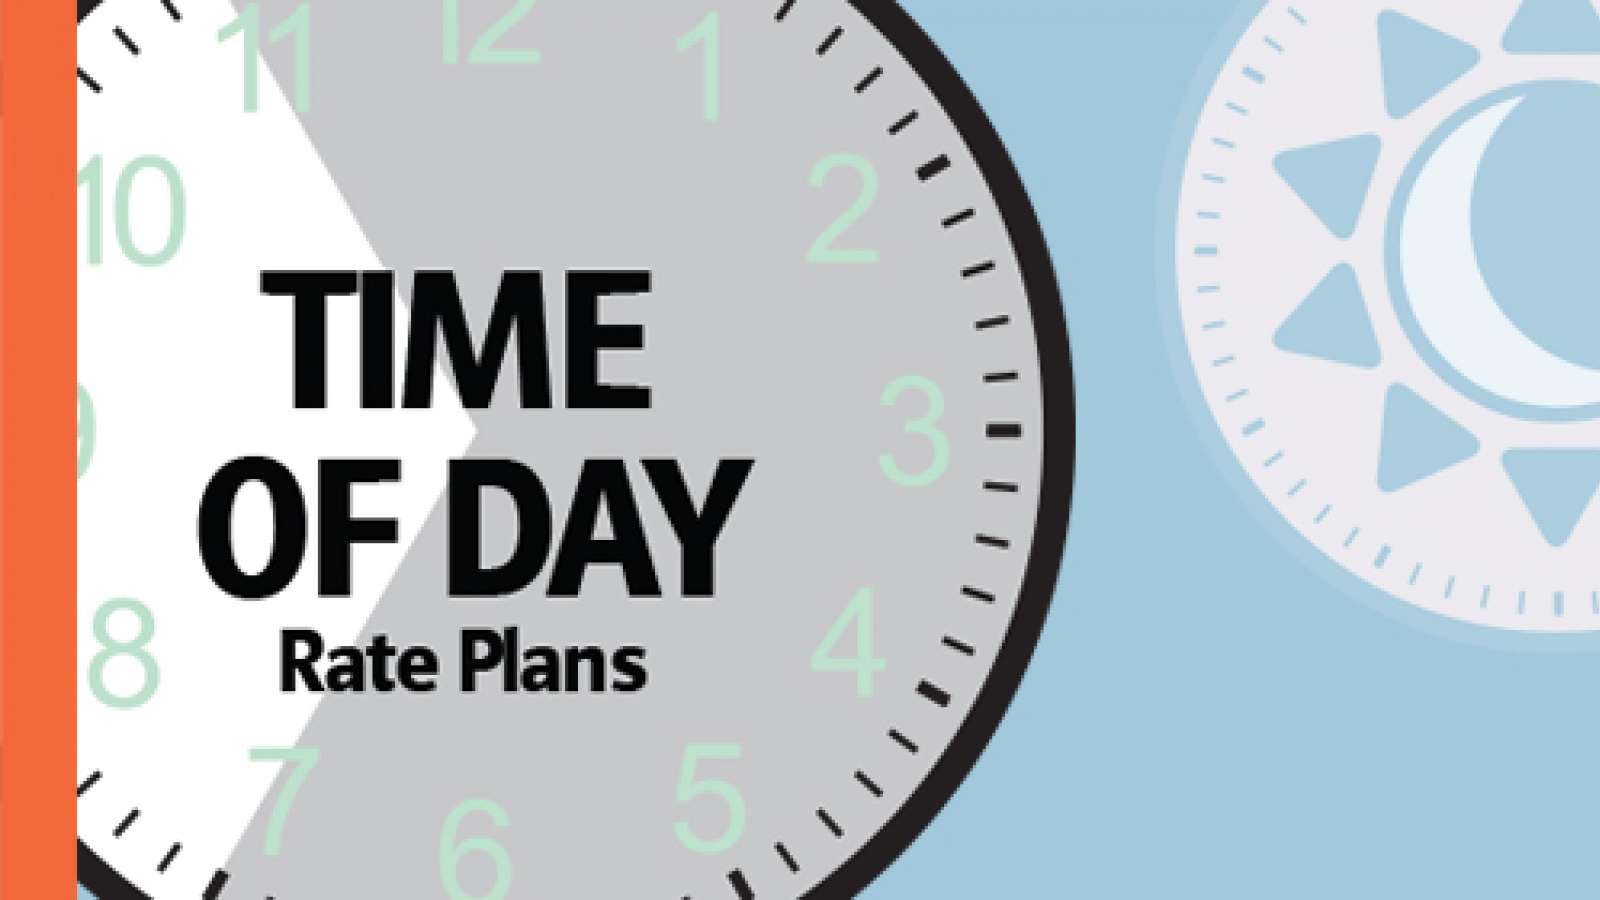 Time of day rate plans graphic clock and icons